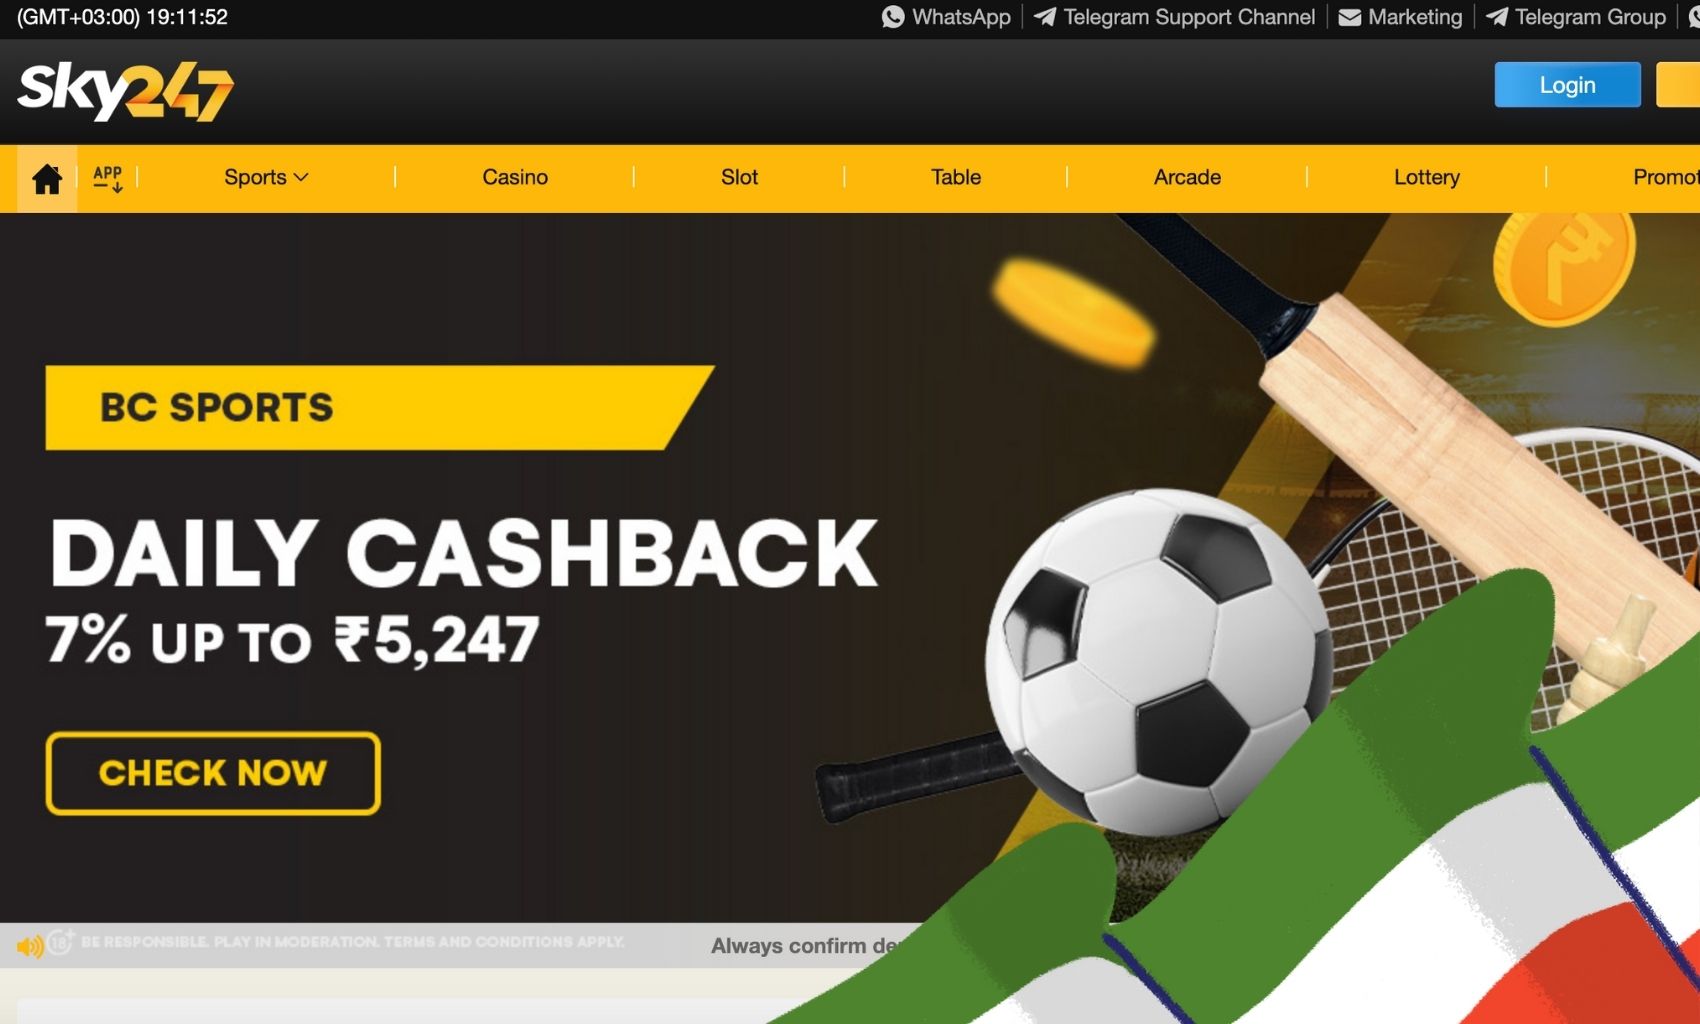 Sky247 sports betting website overview in India